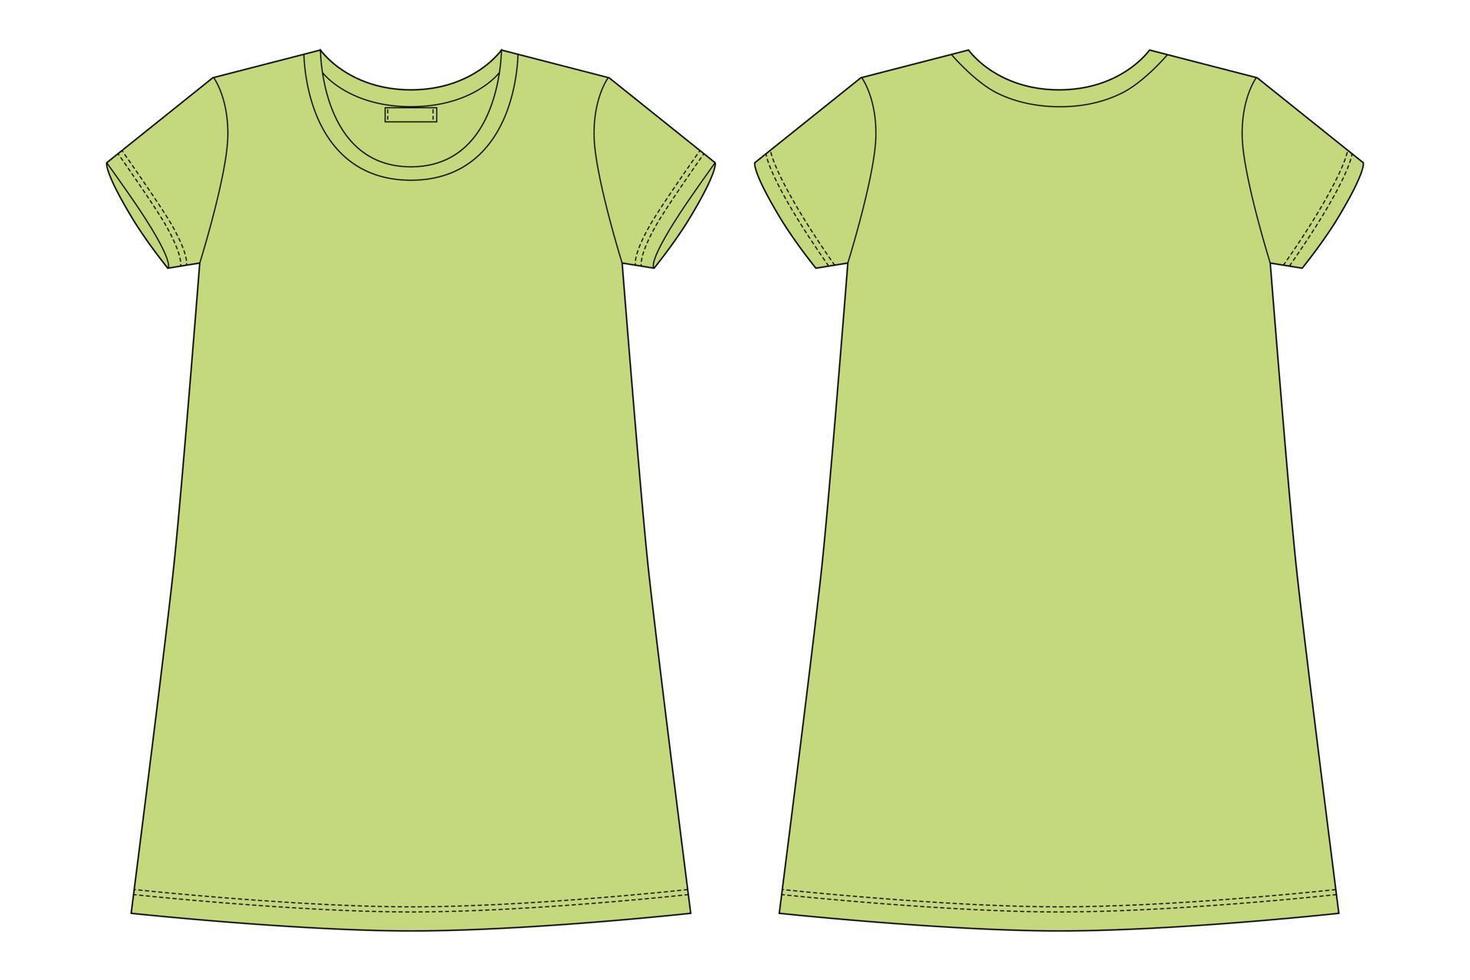 Cotton chemise technical sketch. Green color vector